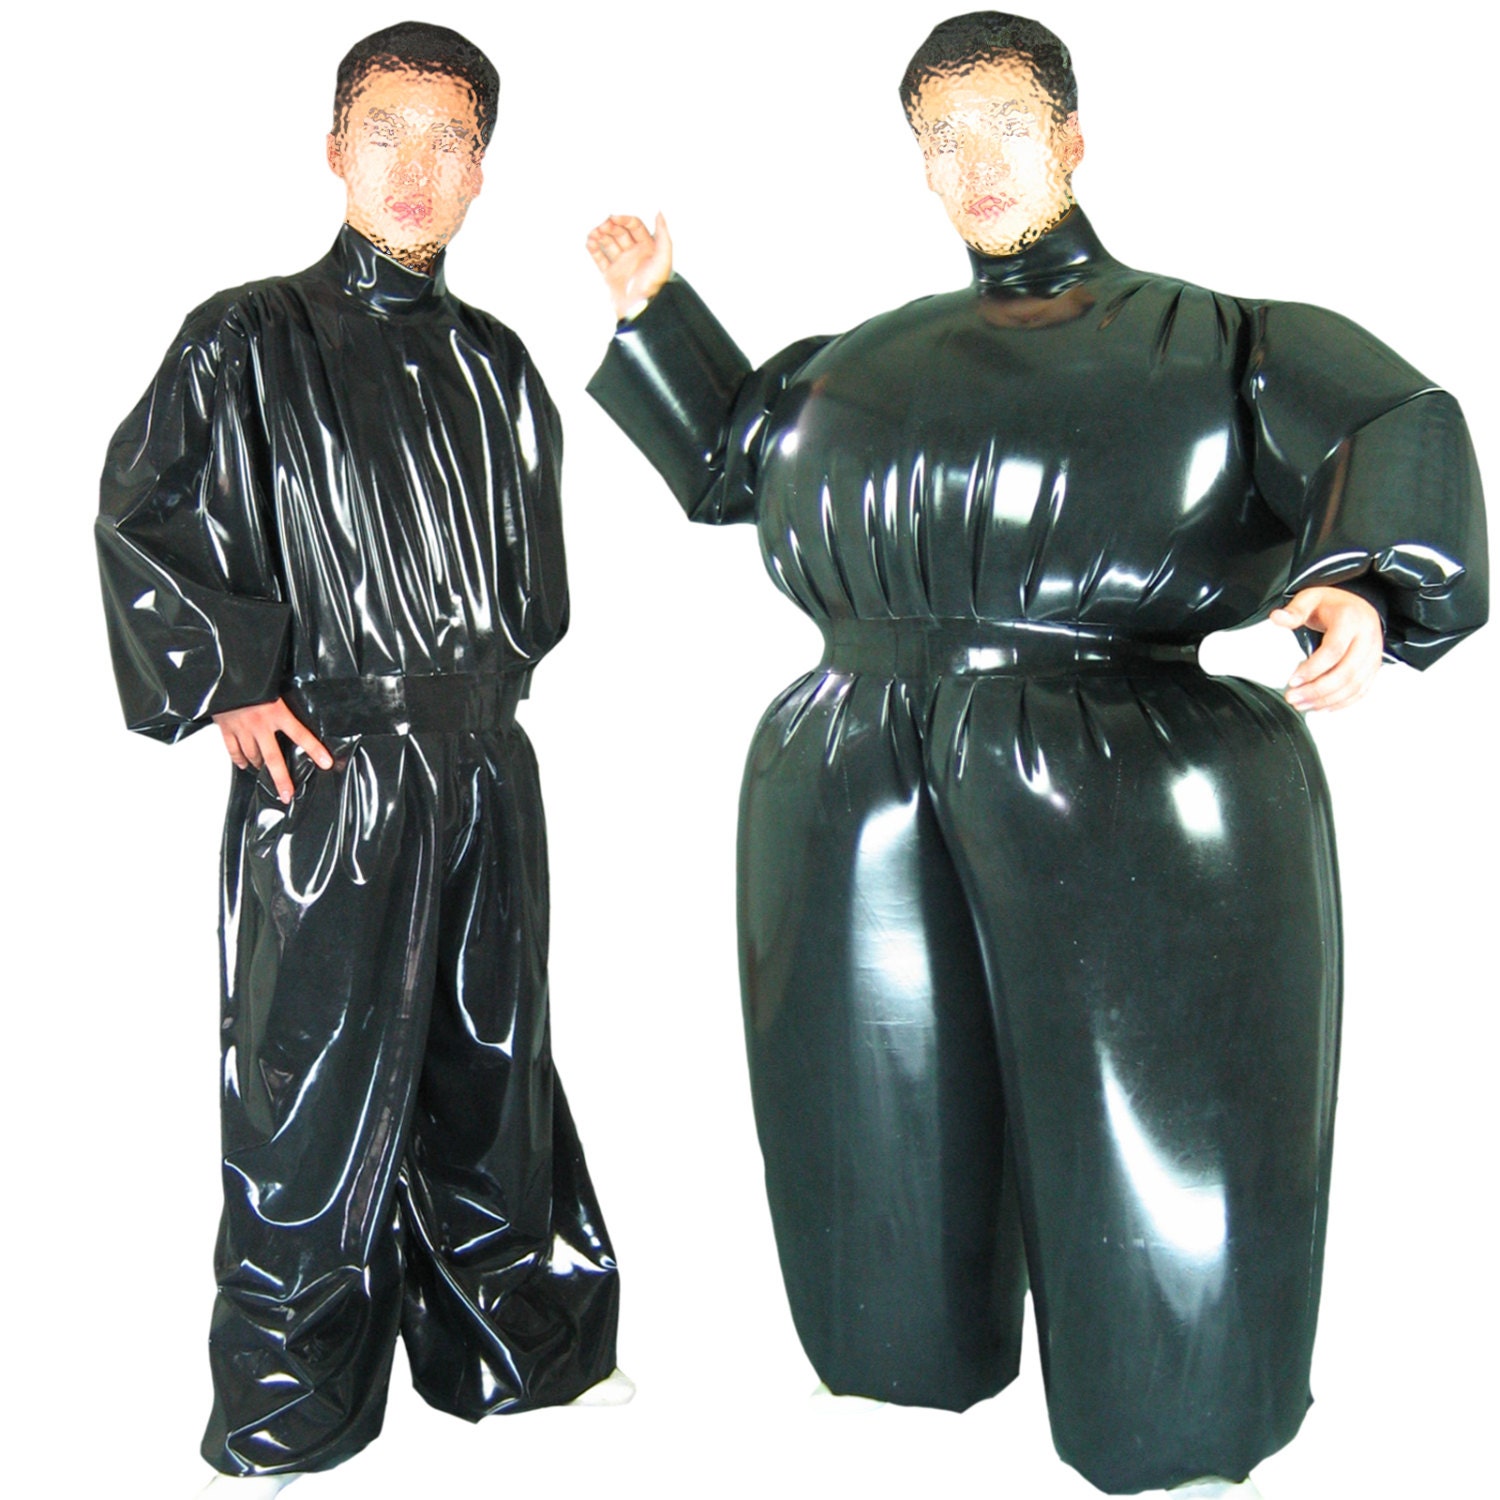 16019AngelDis Rubber Cosume Latex Inflatable Suit By AngelDis.